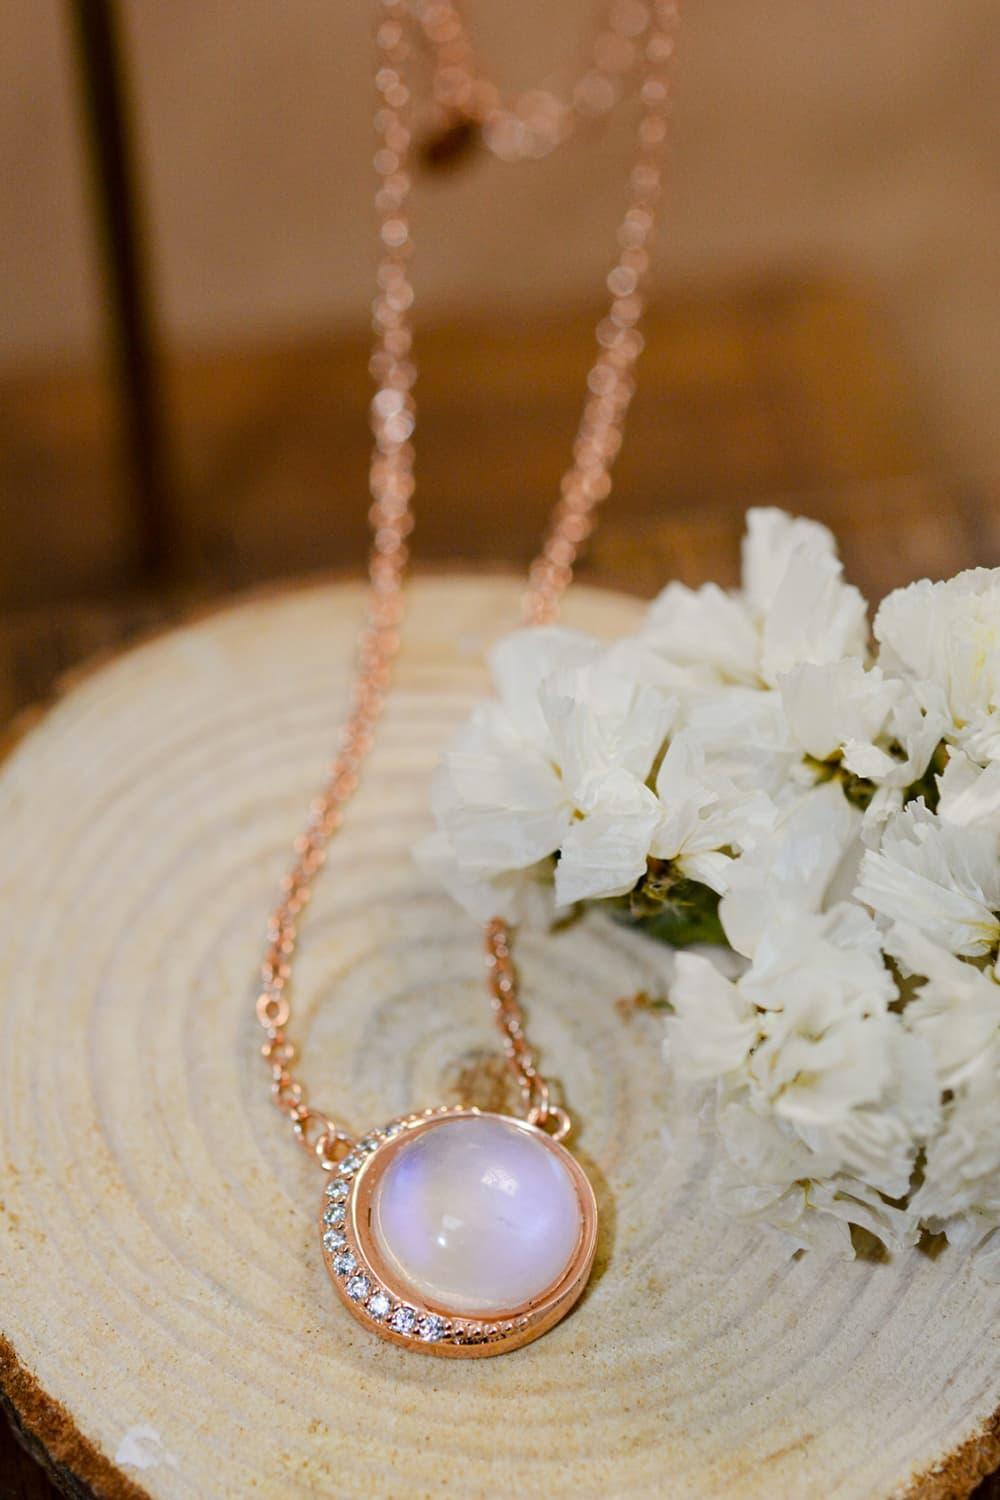 Tranquil Life Rose Gold Plated Chain Moonstone Necklace - MXSTUDIO.COM